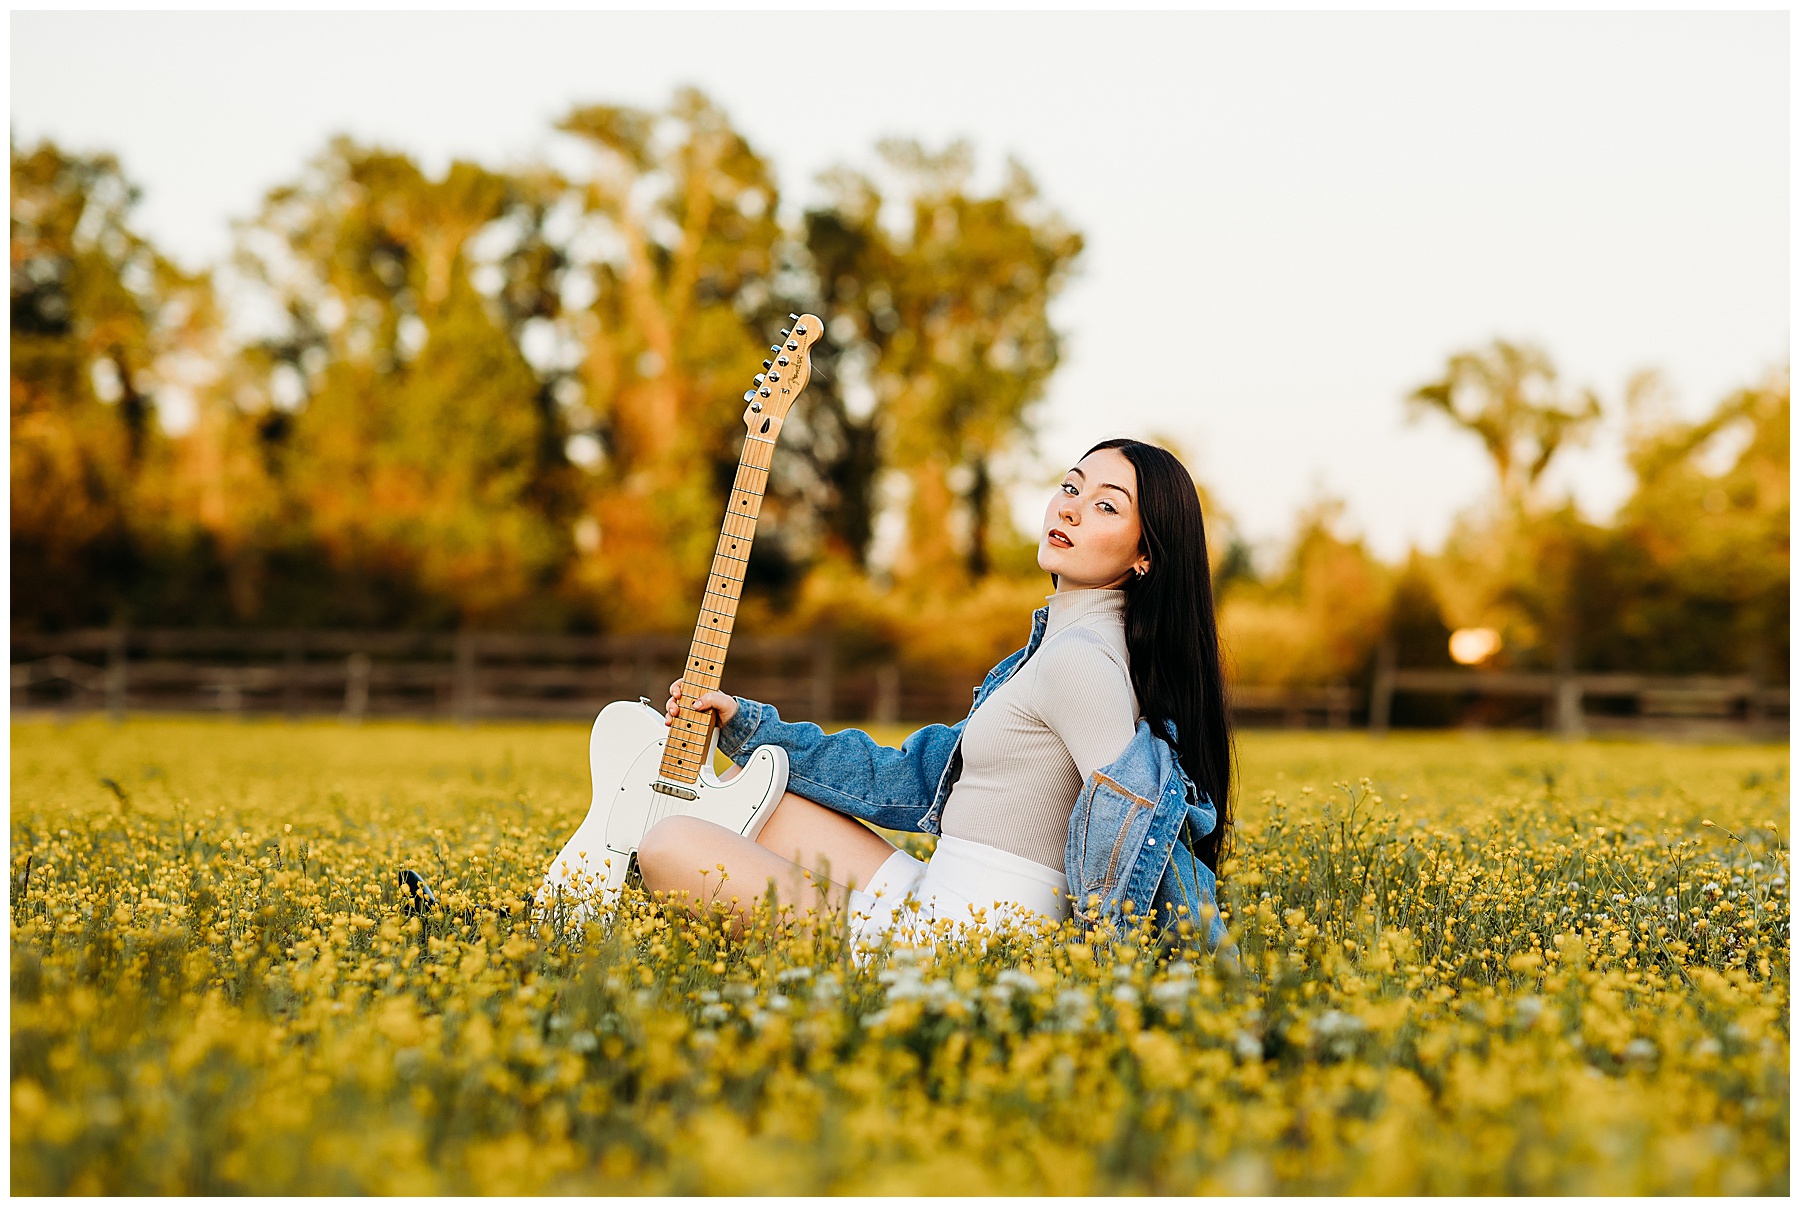 Girl posing with her guitar in a field of yellow flowers.